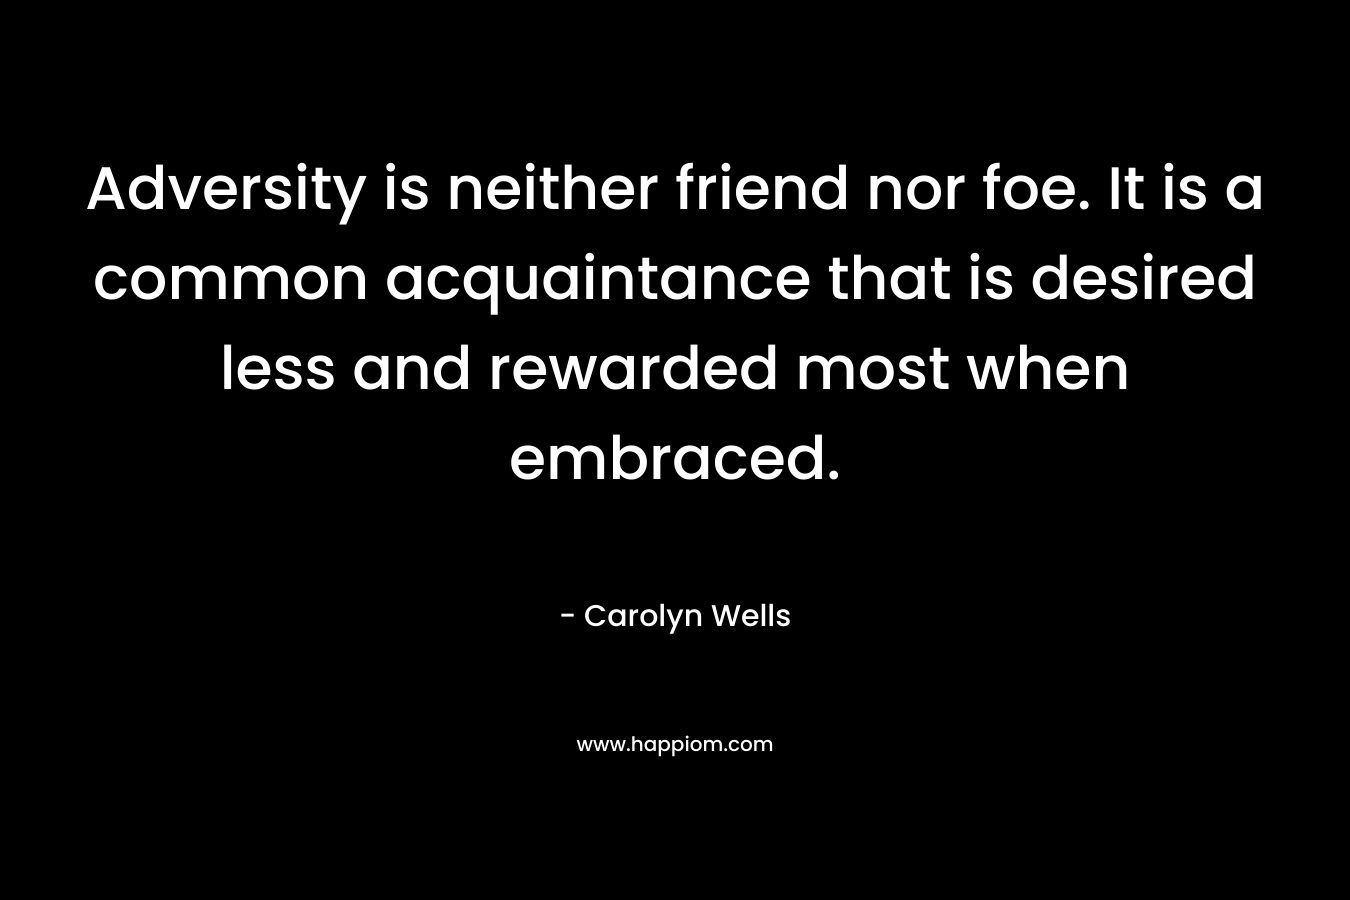 Adversity is neither friend nor foe. It is a common acquaintance that is desired less and rewarded most when embraced. – Carolyn Wells